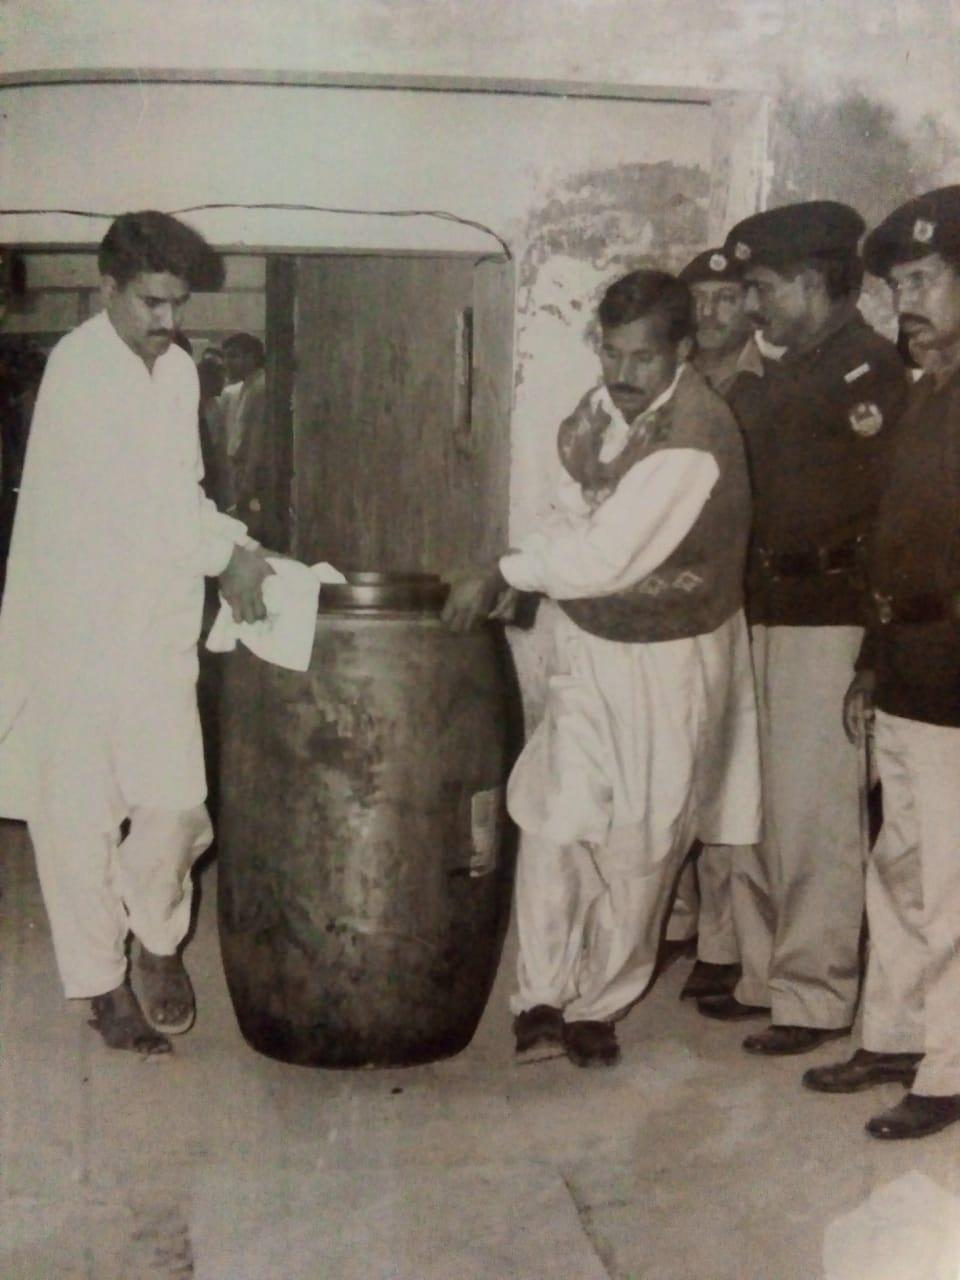 Police later recovered acid drums from Javed Iqbal's home.